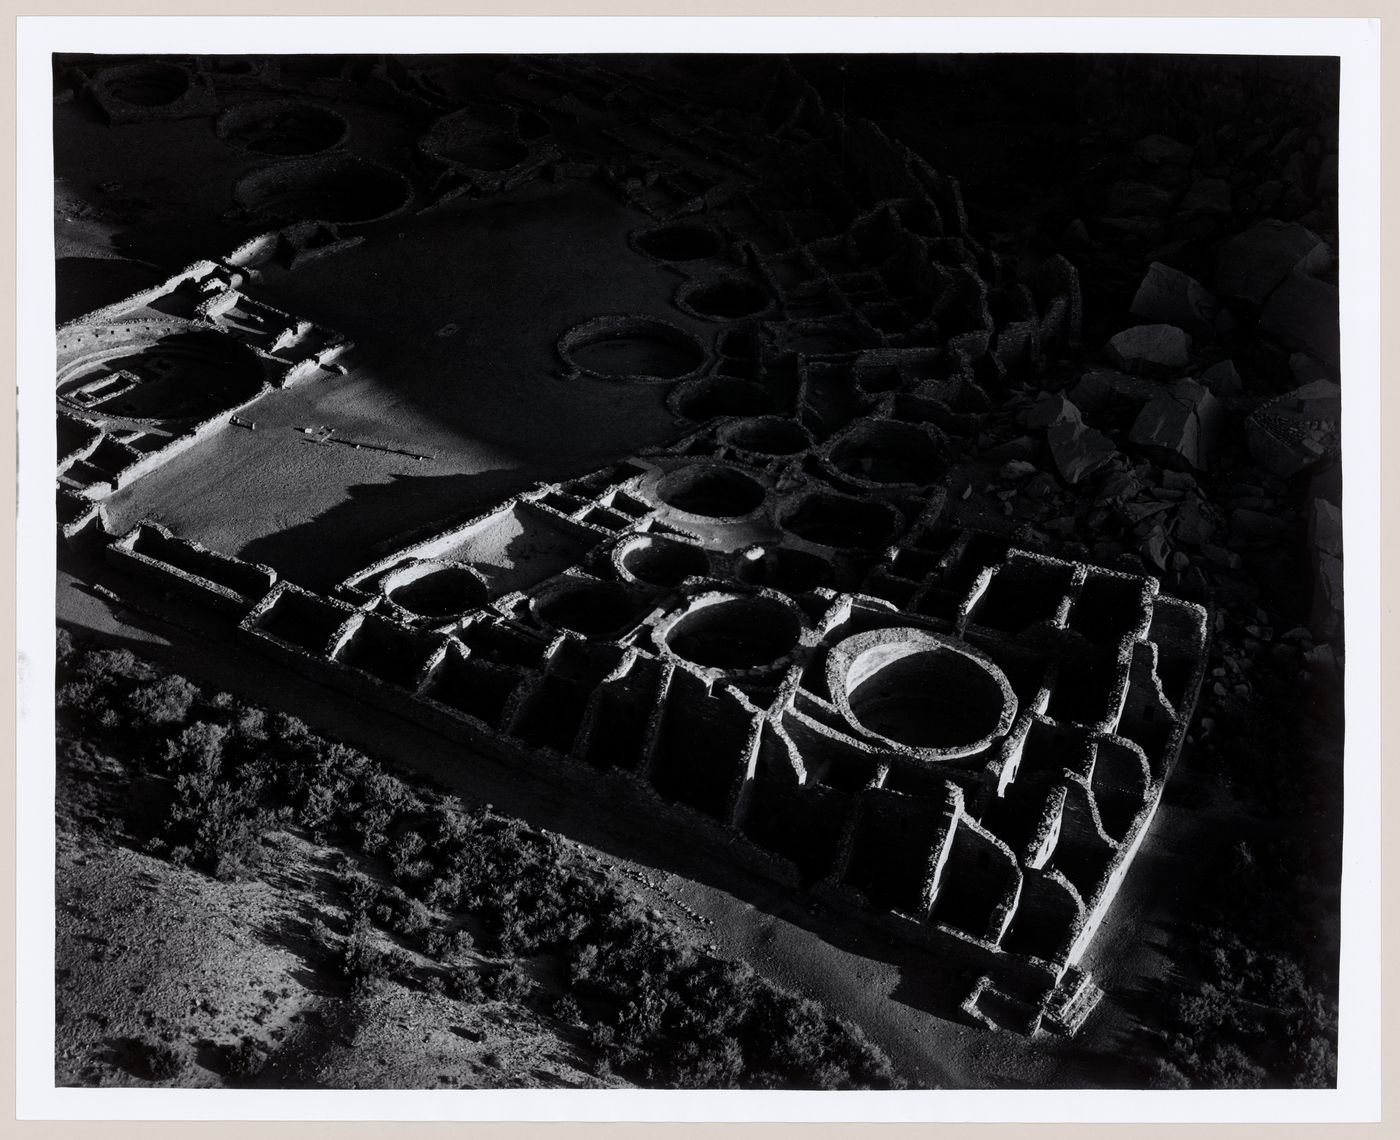 Aerial view of Pueblo Bonito, Chaco Canyon, New Mexico, United States